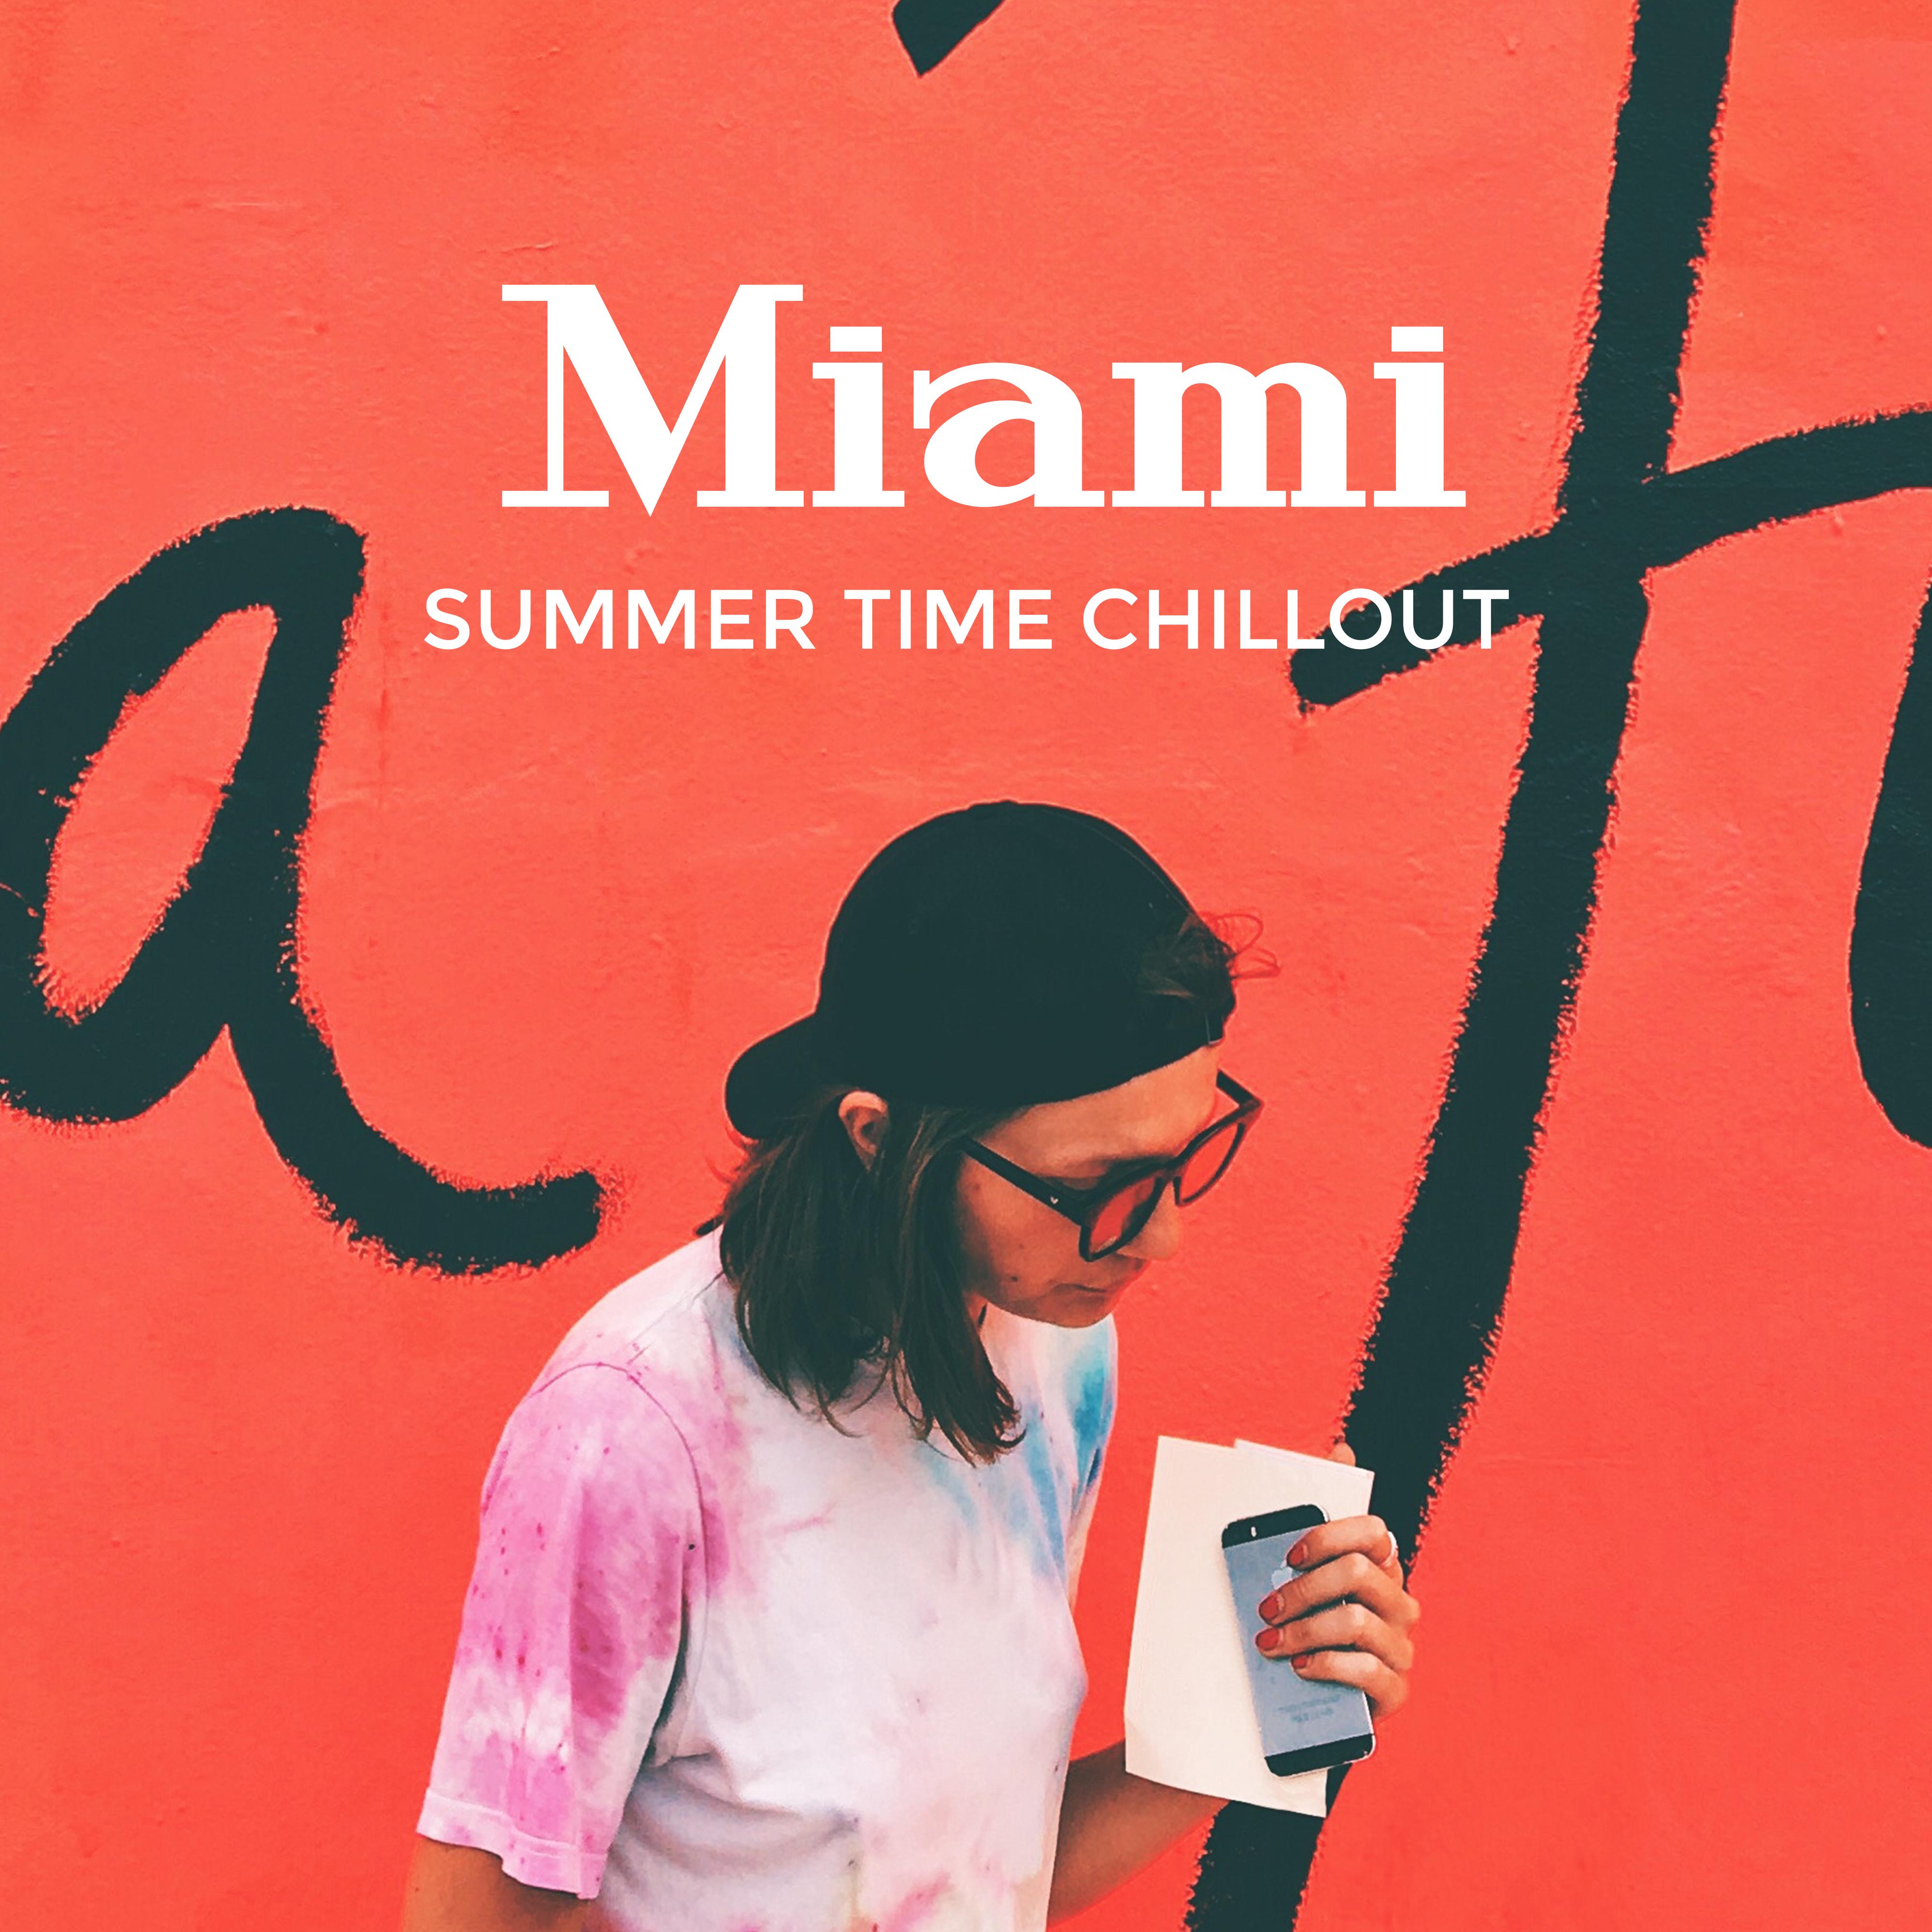 Miami Summer Time Chillout: Top 2019 Chill Out Beats & Vibes, Tropical Holidays Background Songs, Bossa Lounge, Soft Melodies